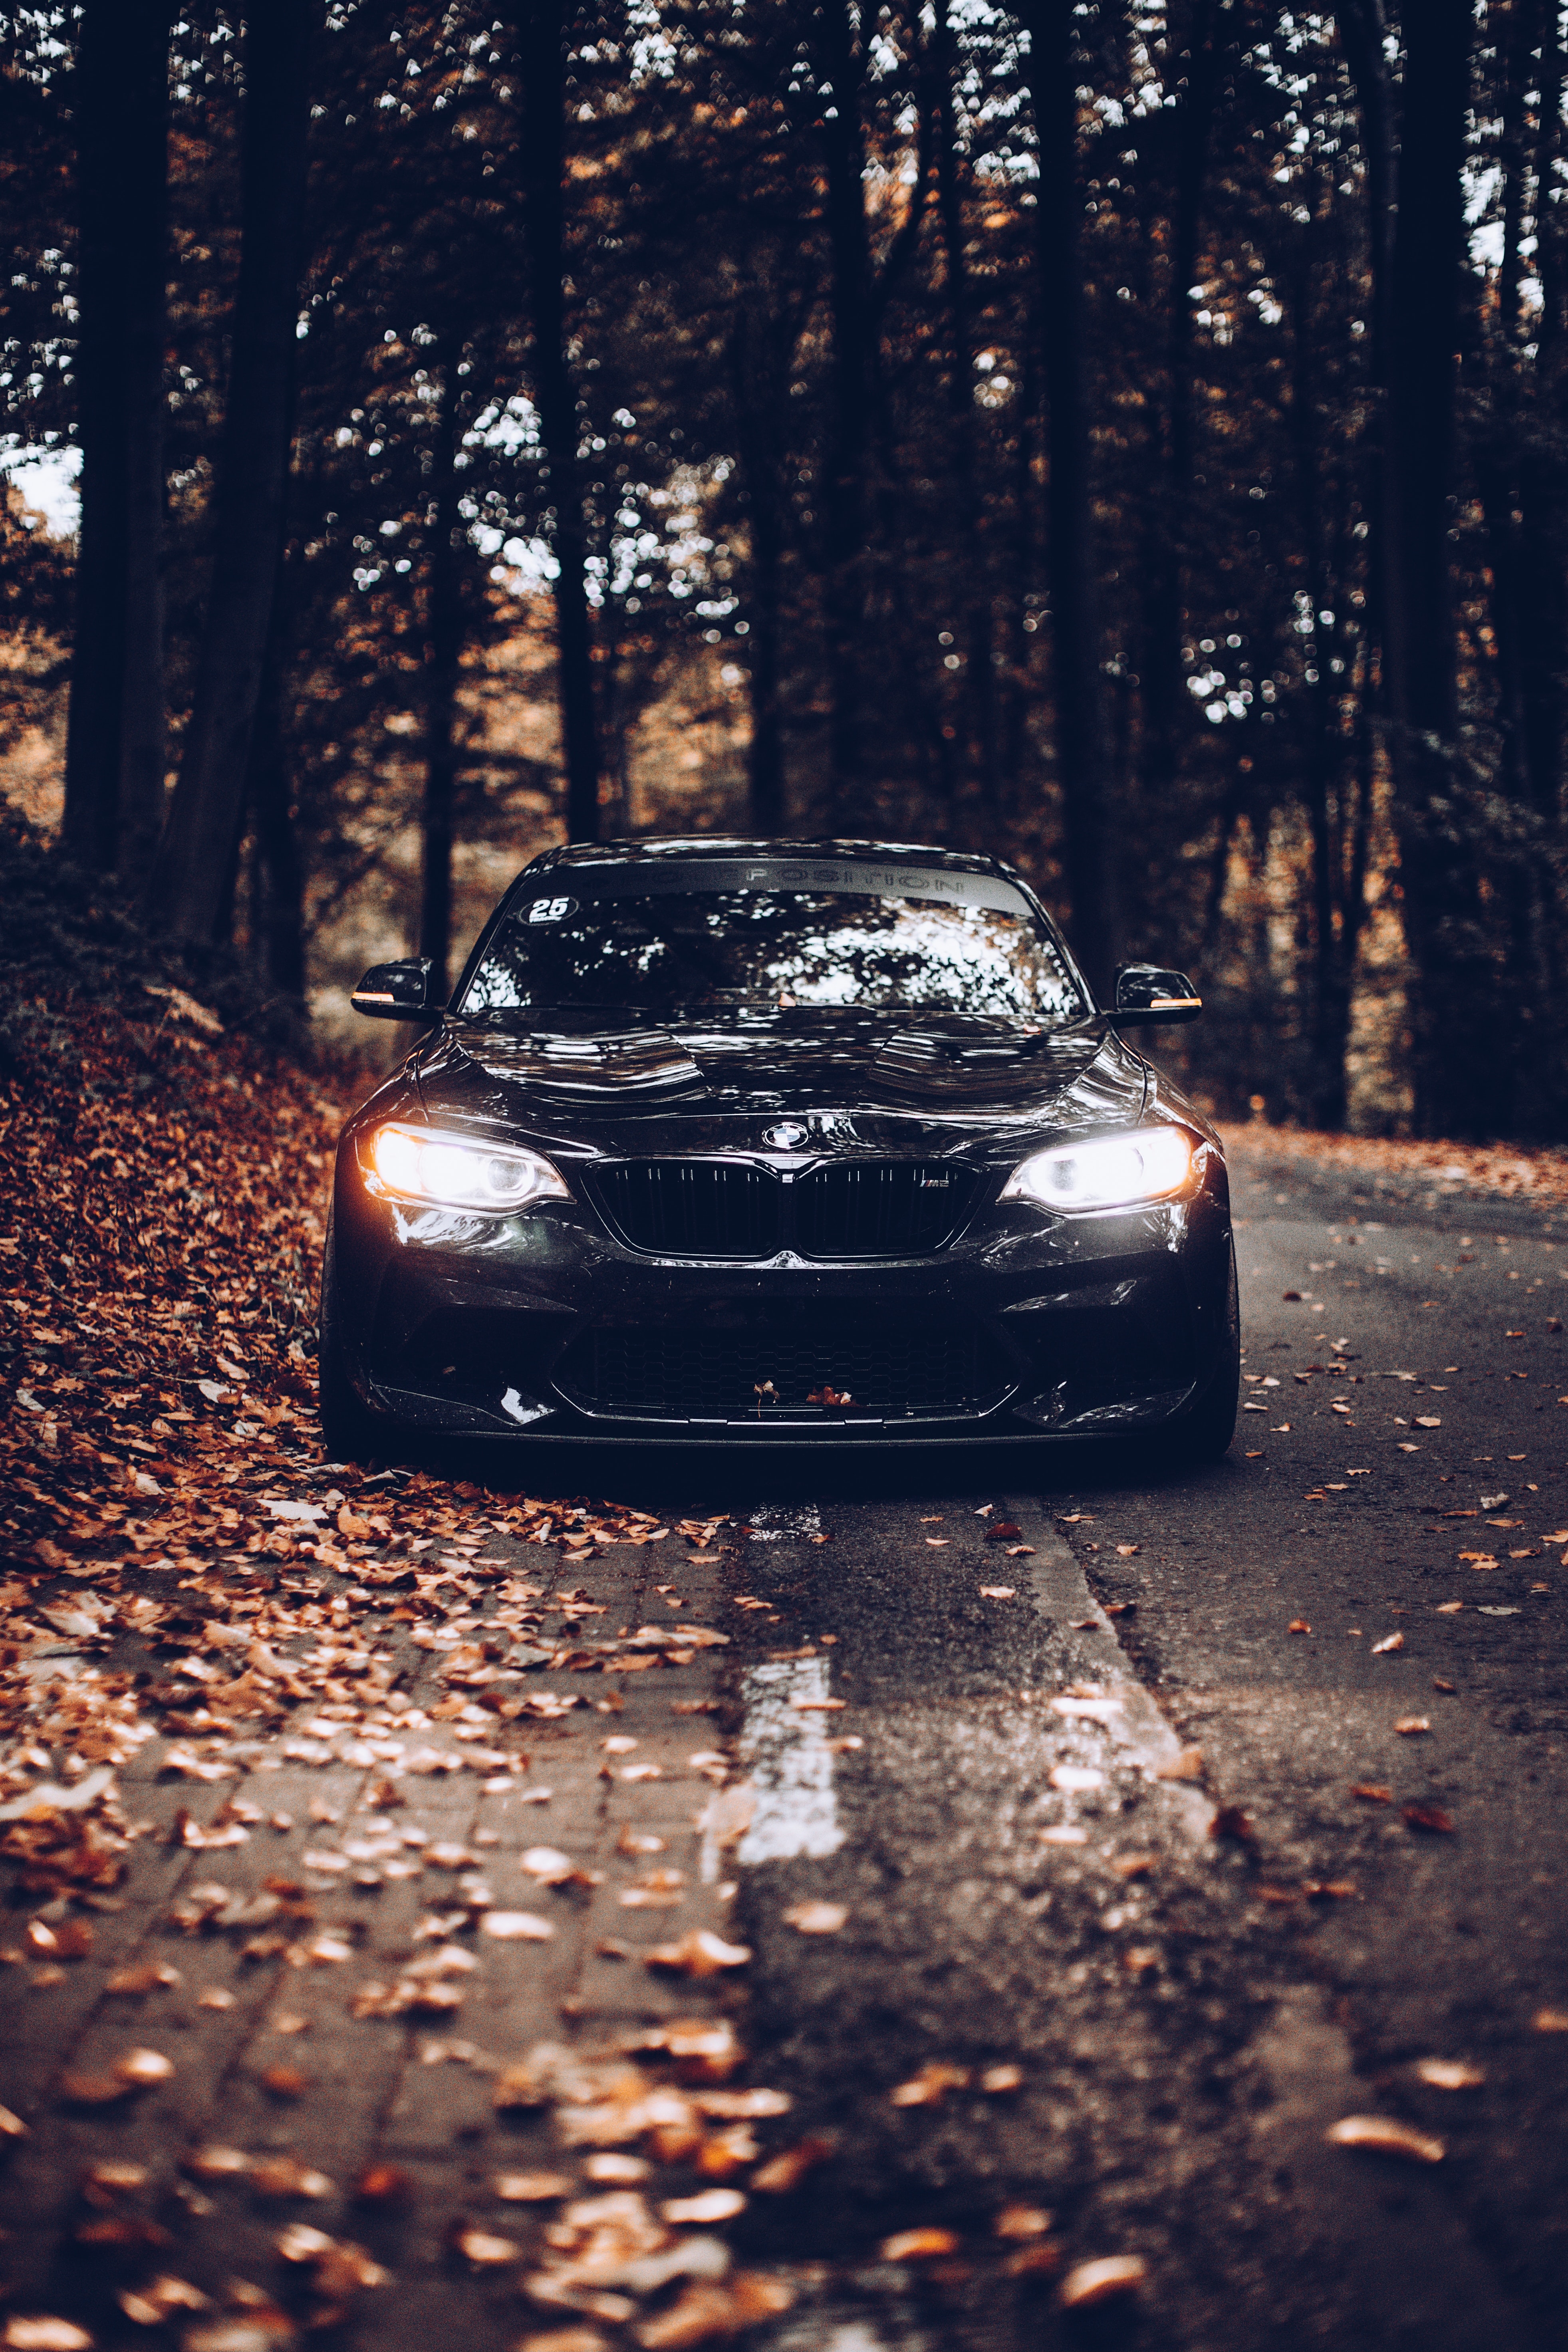 Wallpaper for mobile devices autumn, cars, car, front view